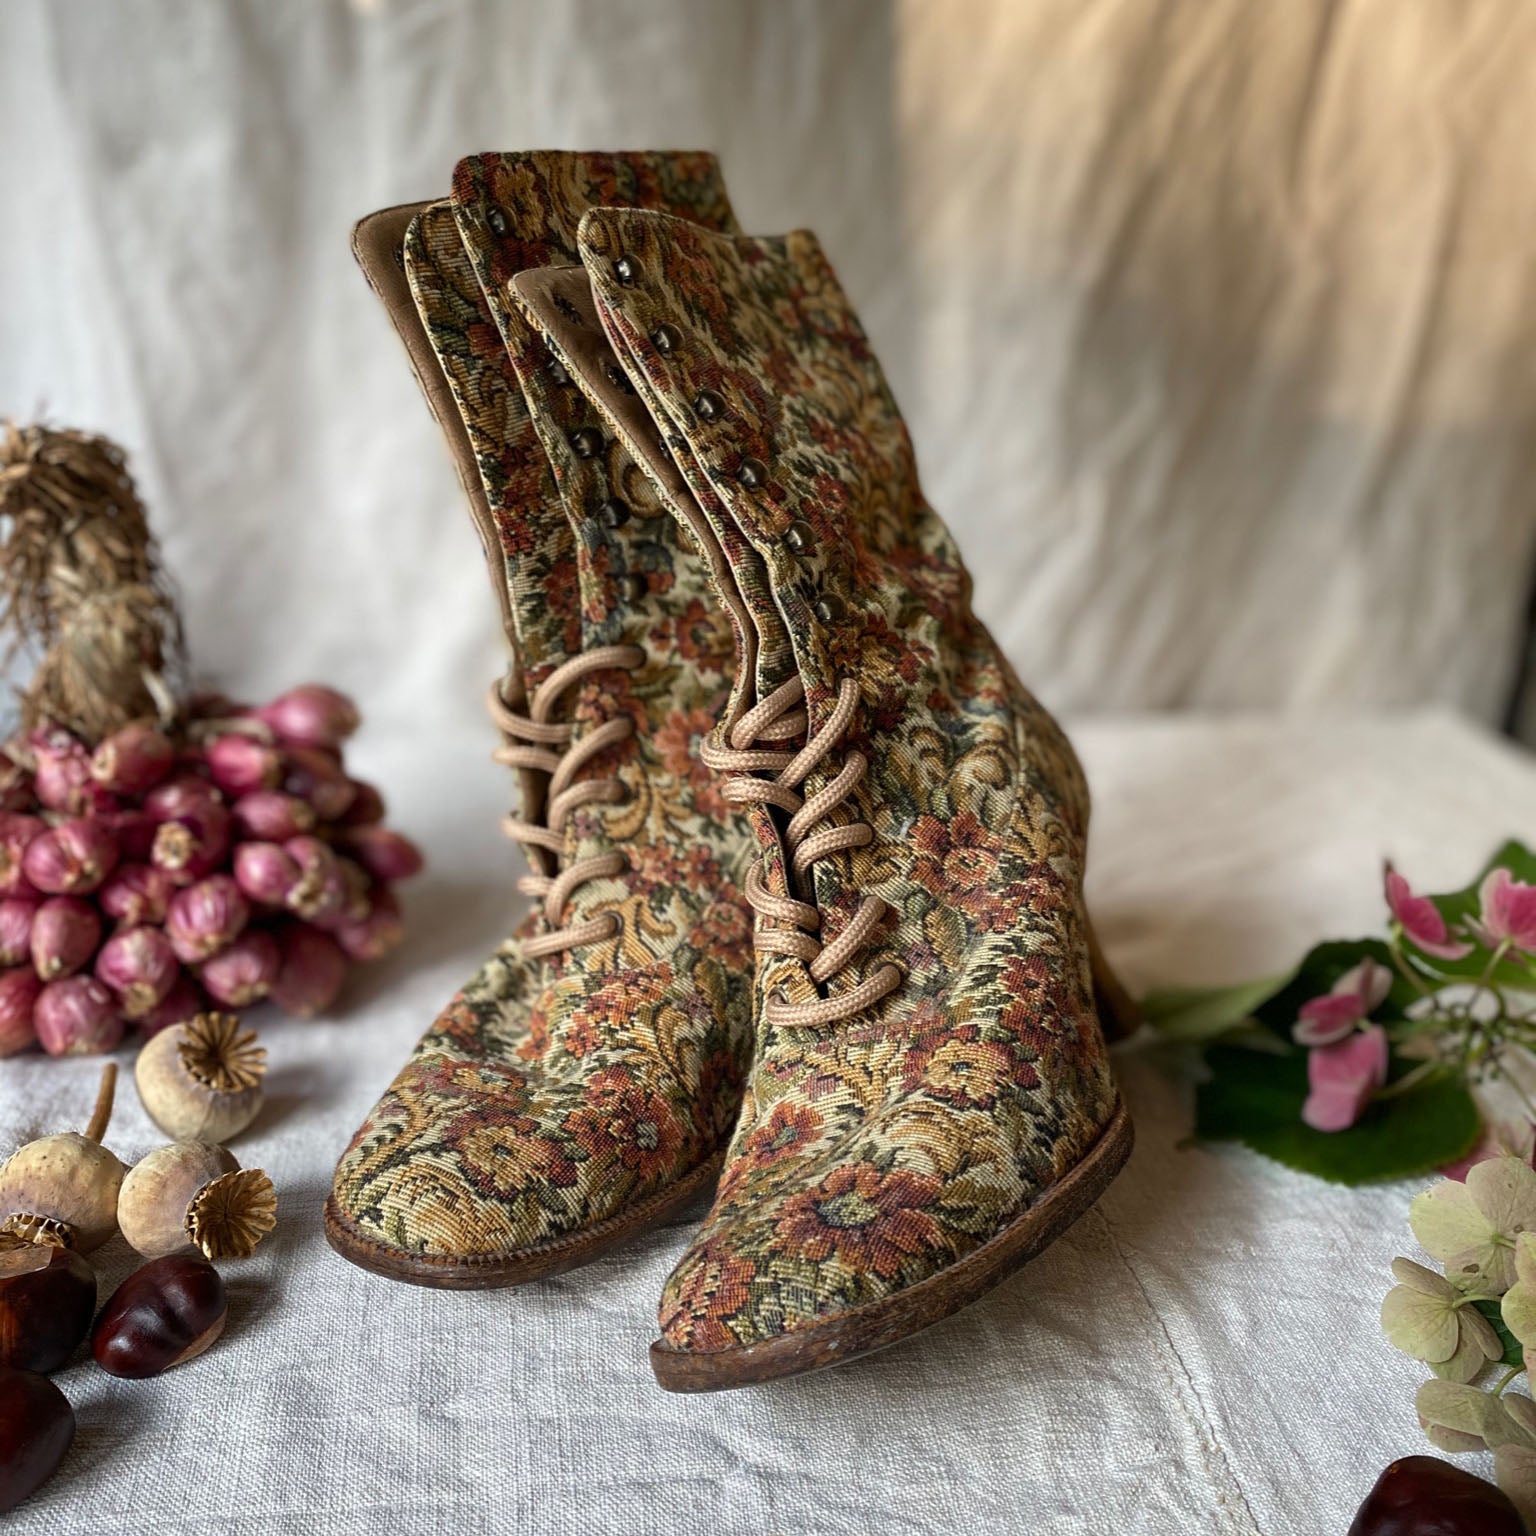 Patrick Cox Tapestry Boots